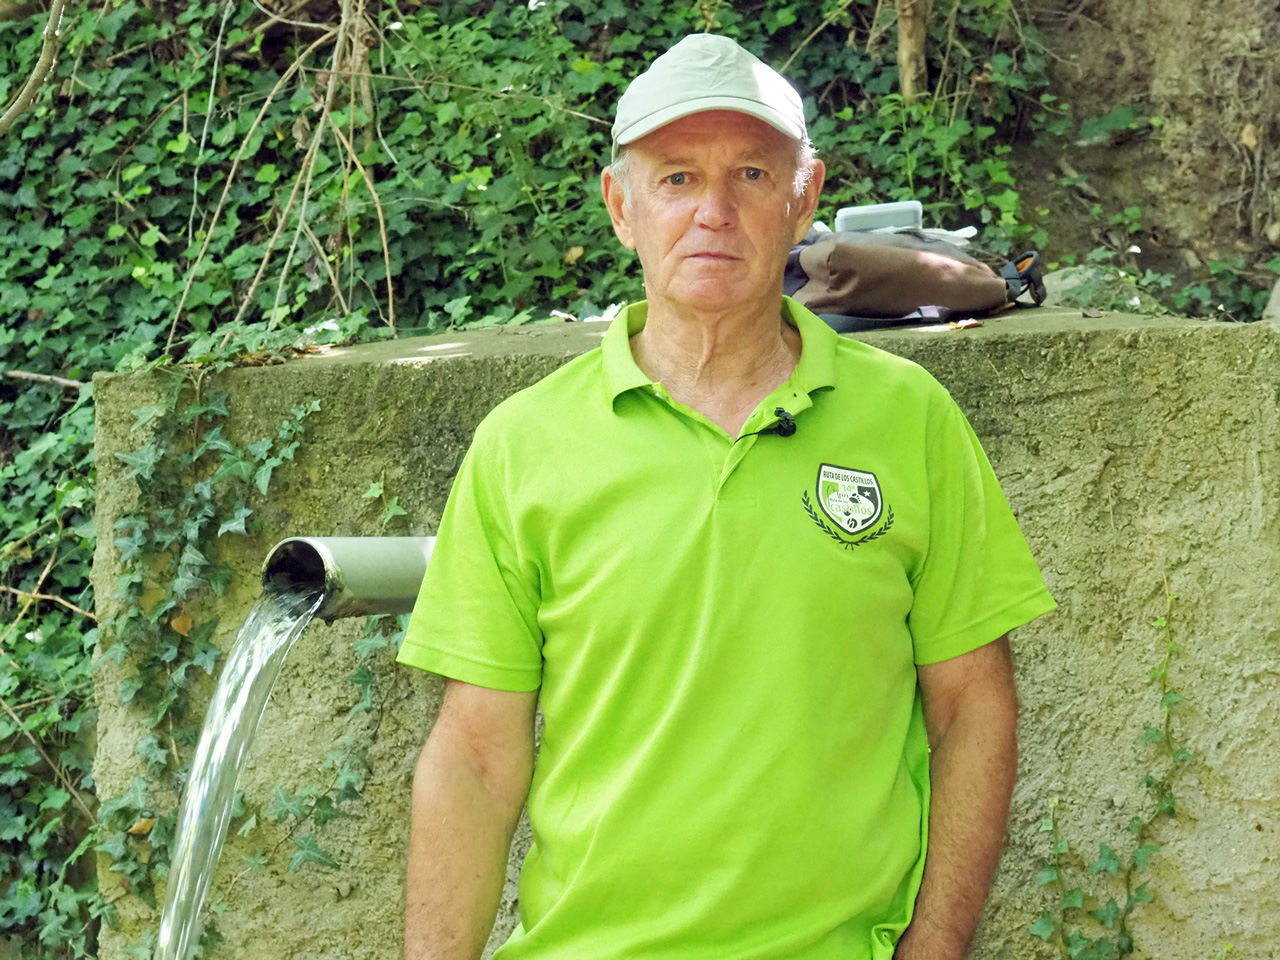 Bernardo Más, president of the LiertAgua Potable Neighborhood Association, in front of the local spring whose levels exceed 100mg/l of nitrates